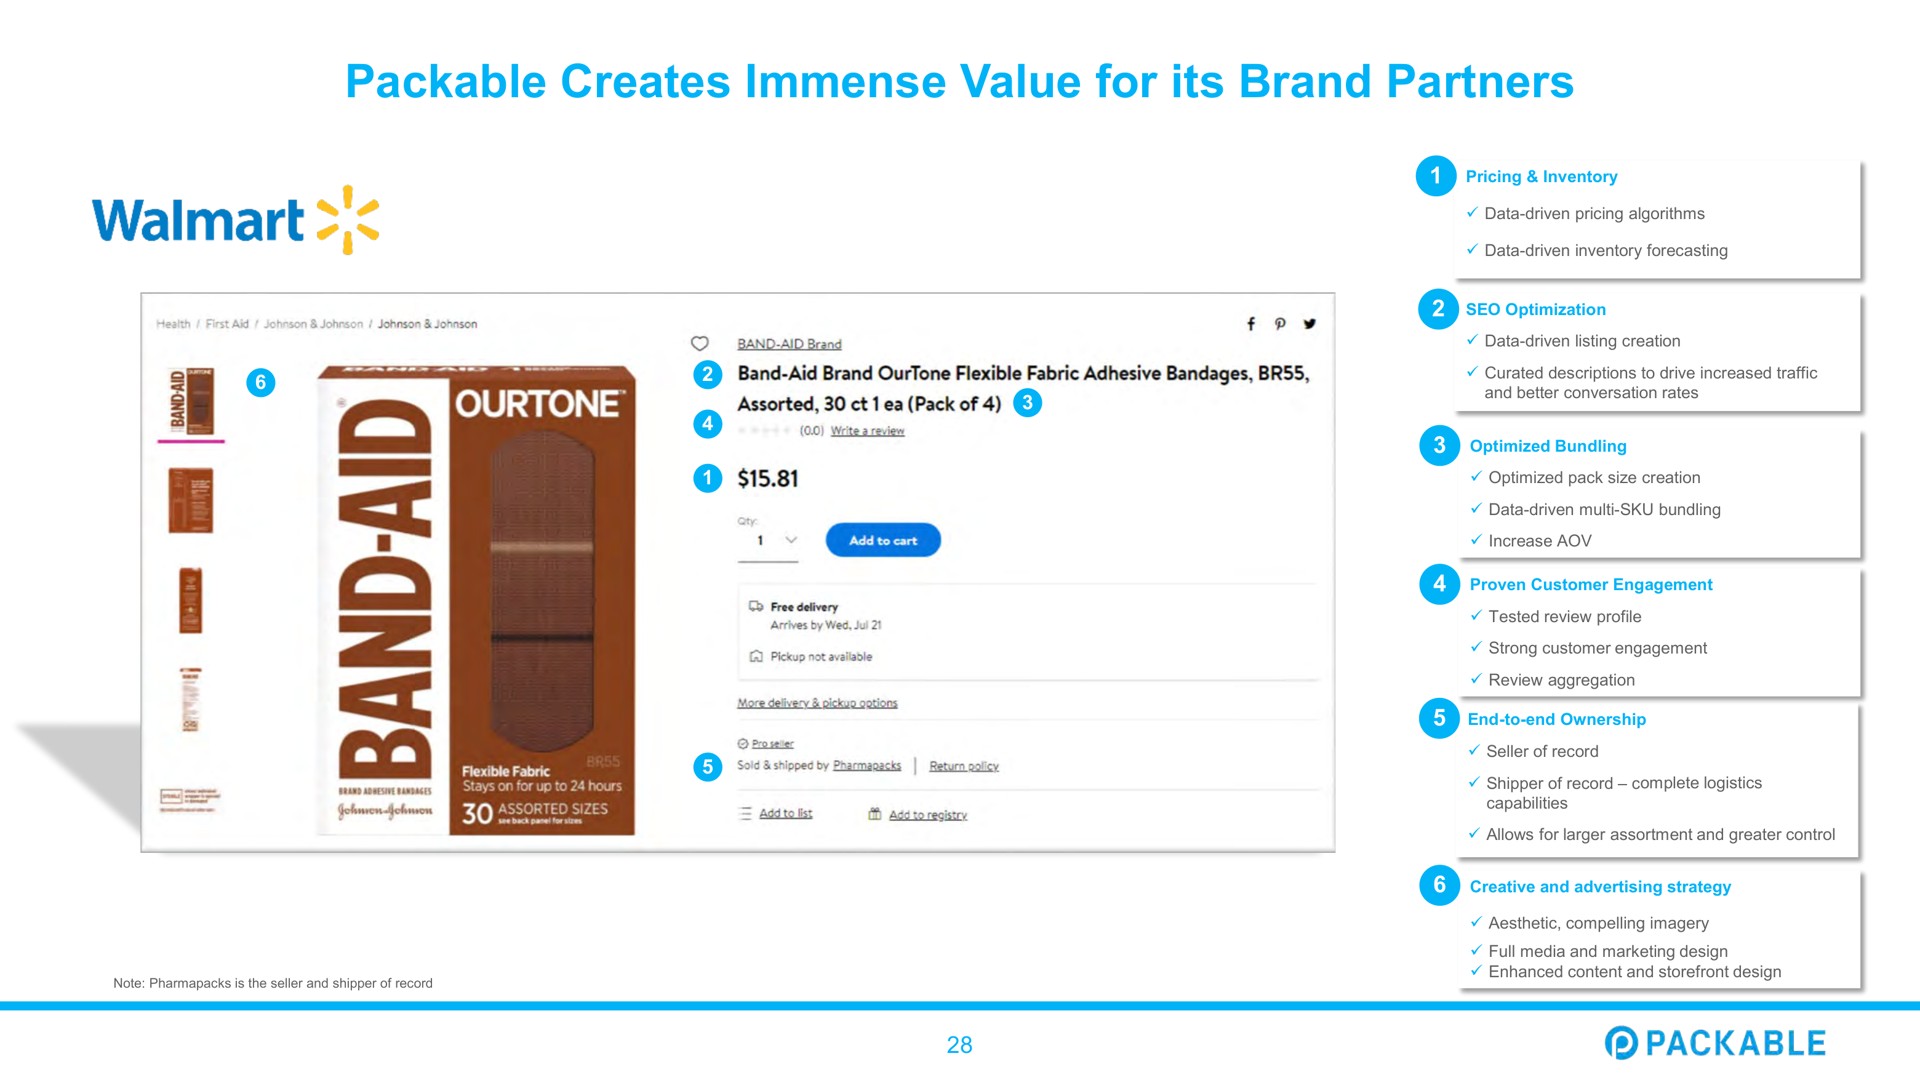 packable creates immense value for its brand partners | Packable